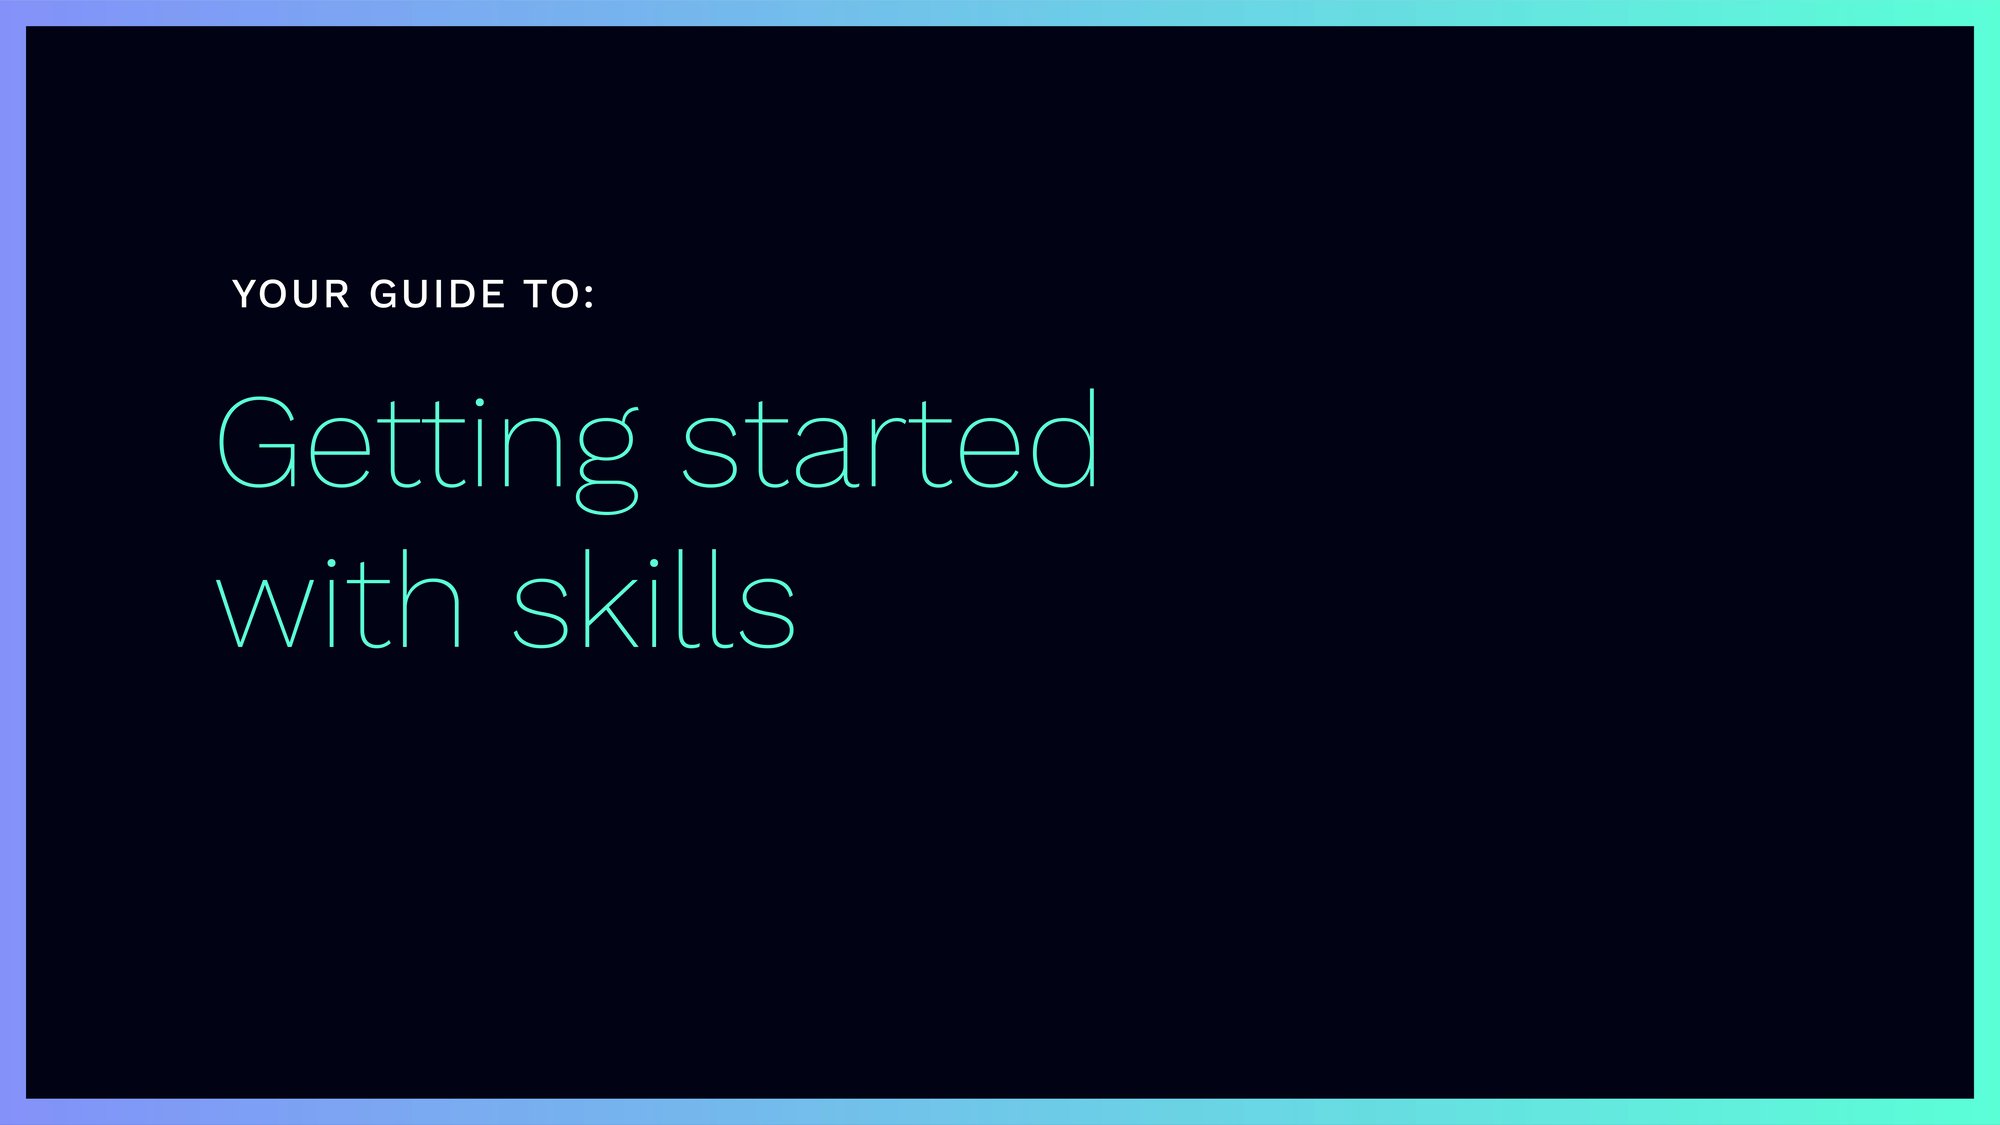 Your guide to: getting started with skills